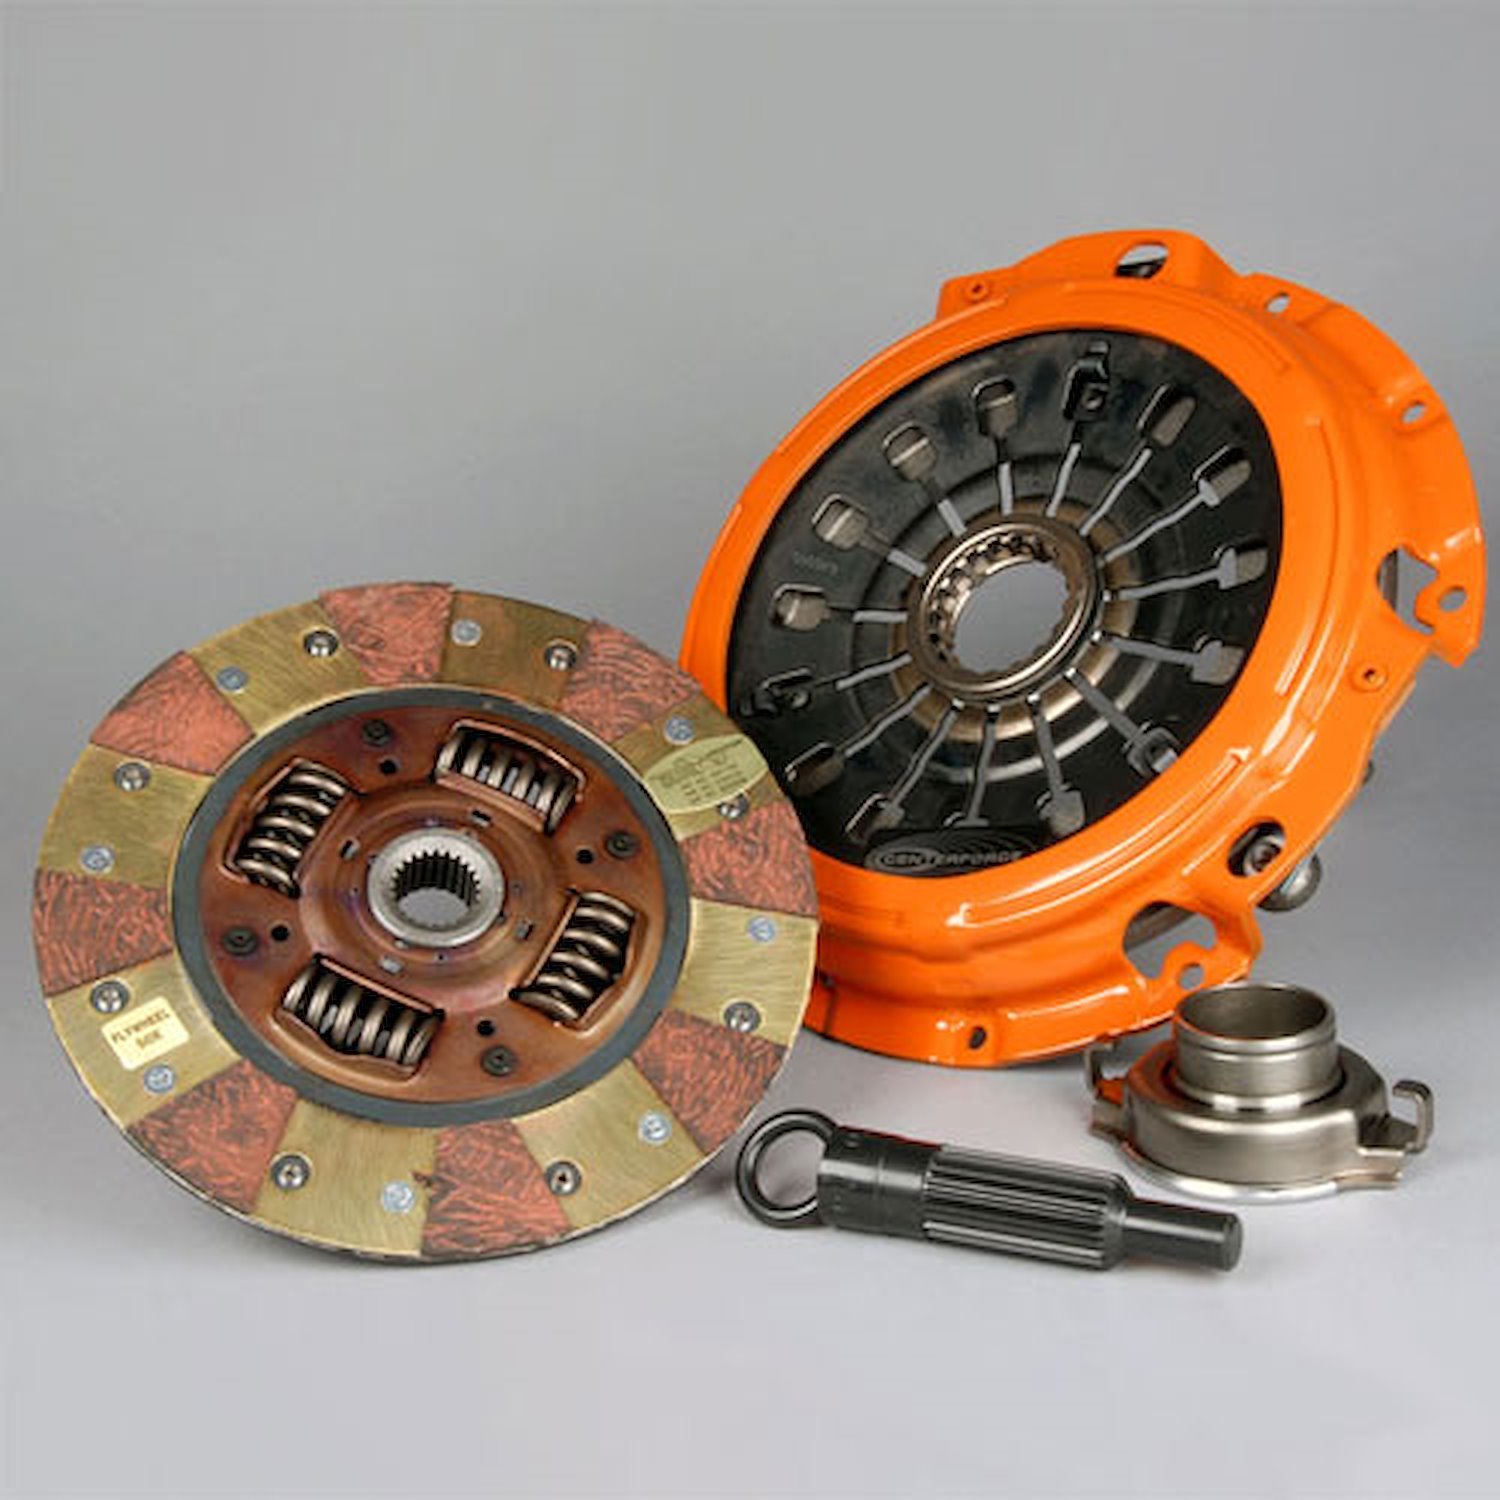 Dual Friction Clutch Includes Pressure Plate, Disc, Throw Out Bearing, & Alignment Tool